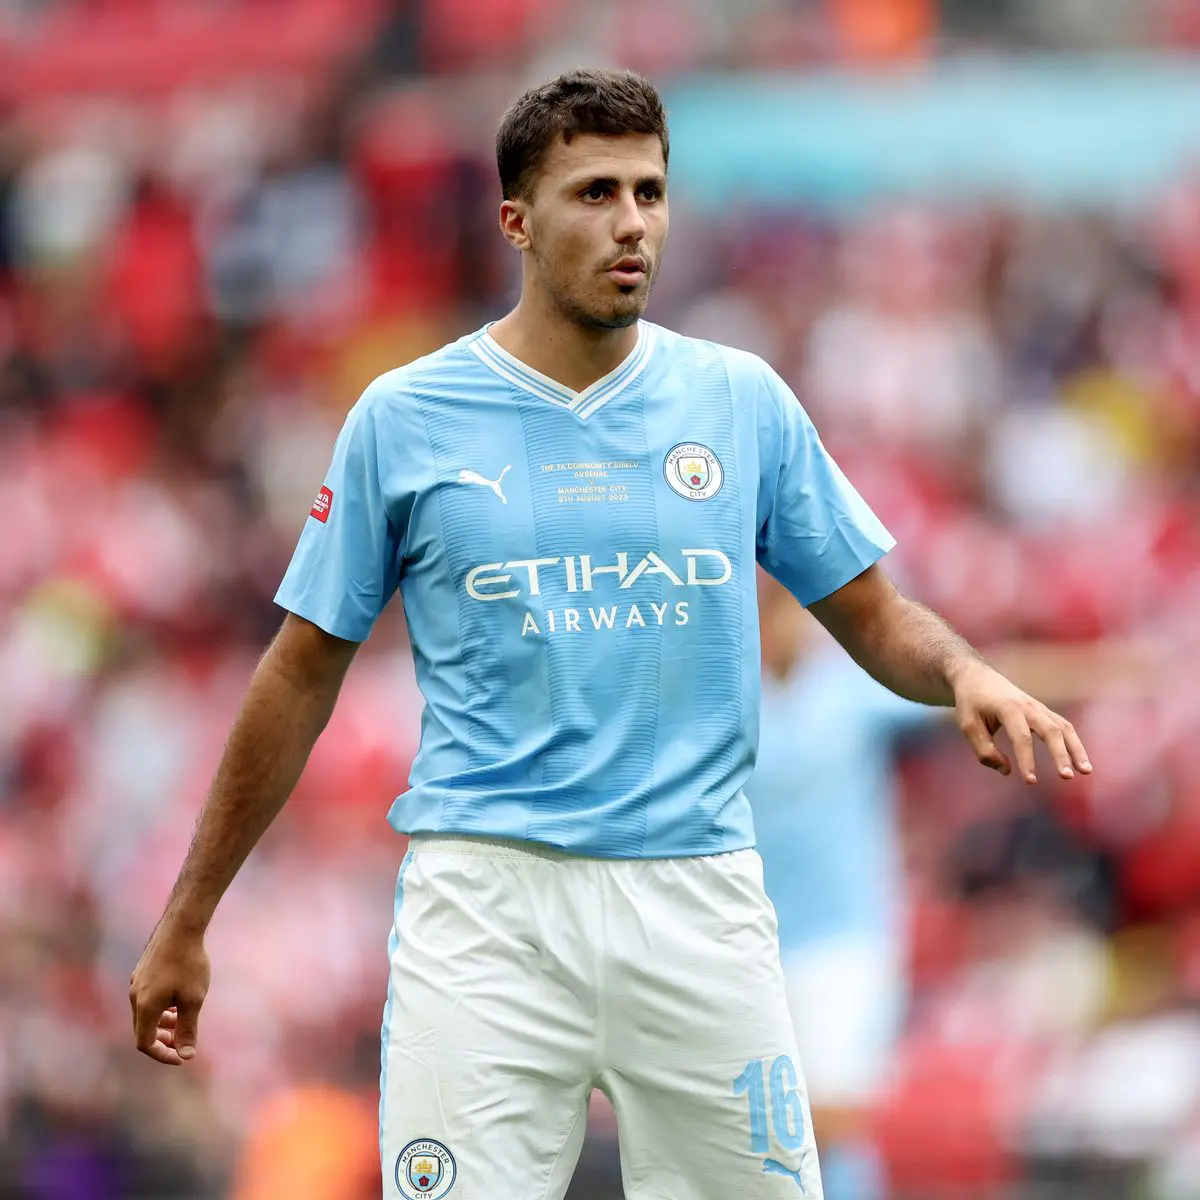 Champions League: ‘I only saw one team’ – Rodri takes dig at Real Madrid as Man City crash out